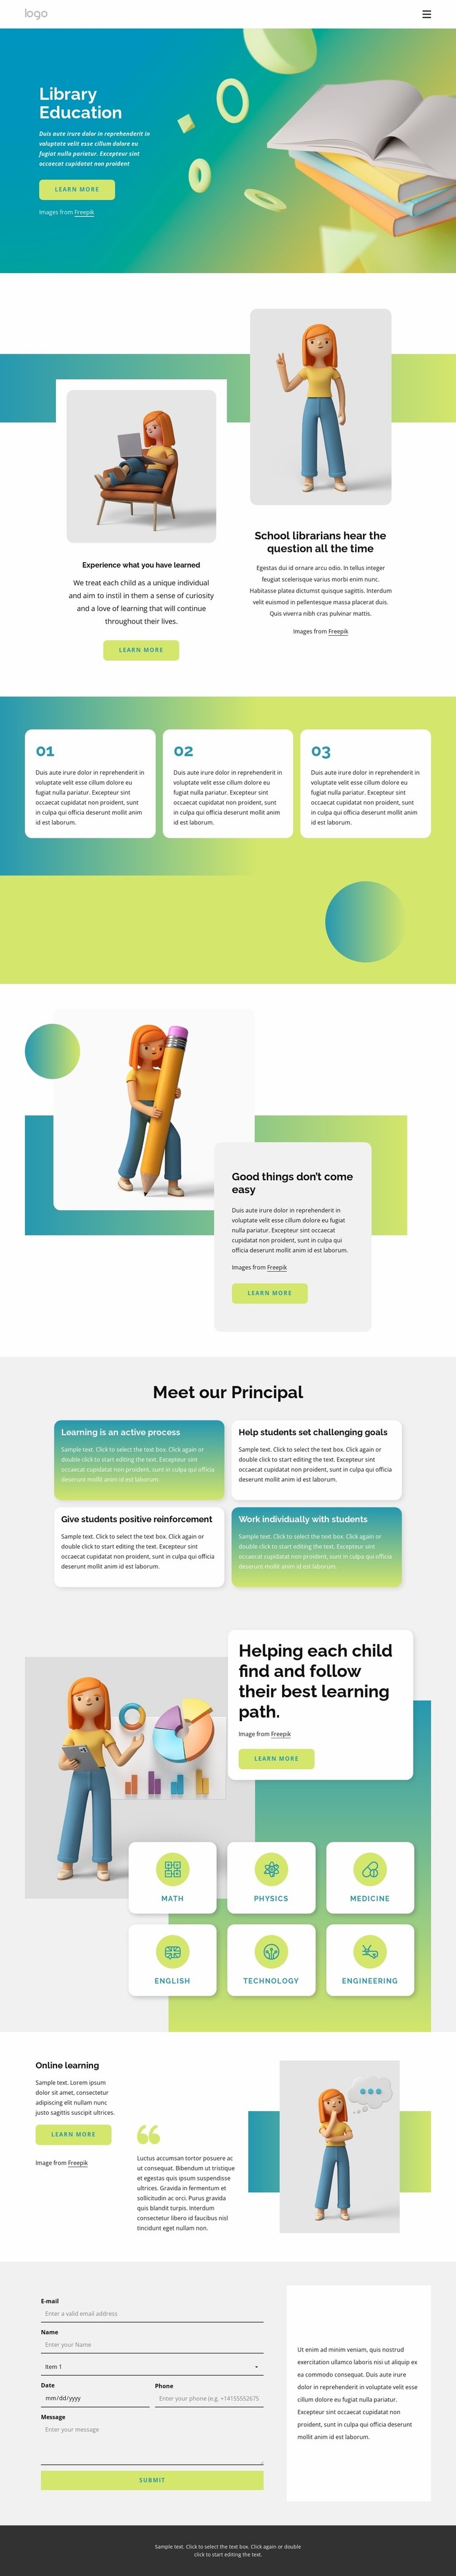 Education library Web Page Designer